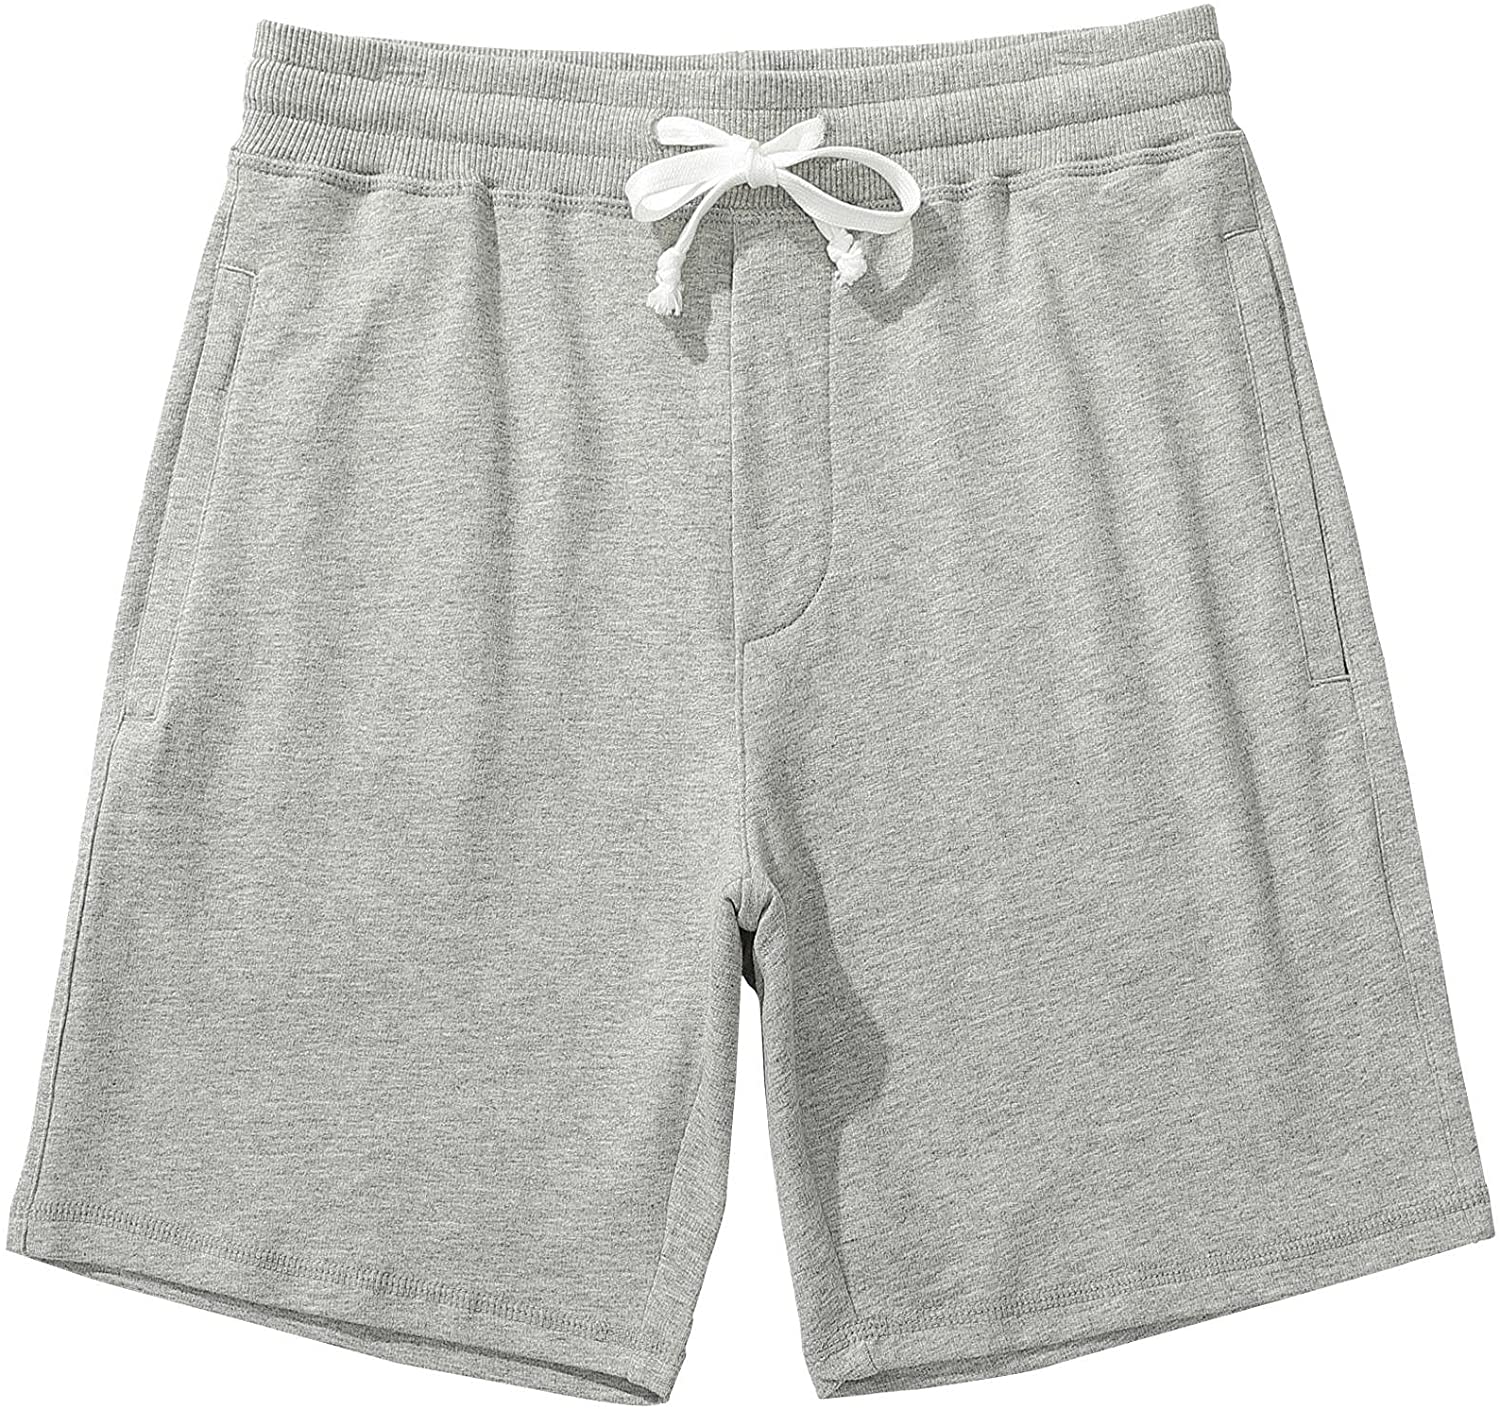 Duuluup Men's Athletic Shorts 7 Inseam Classic Fit Workout Shorts Comfy Cotton Sweat Shorts with Zipper Pockets 